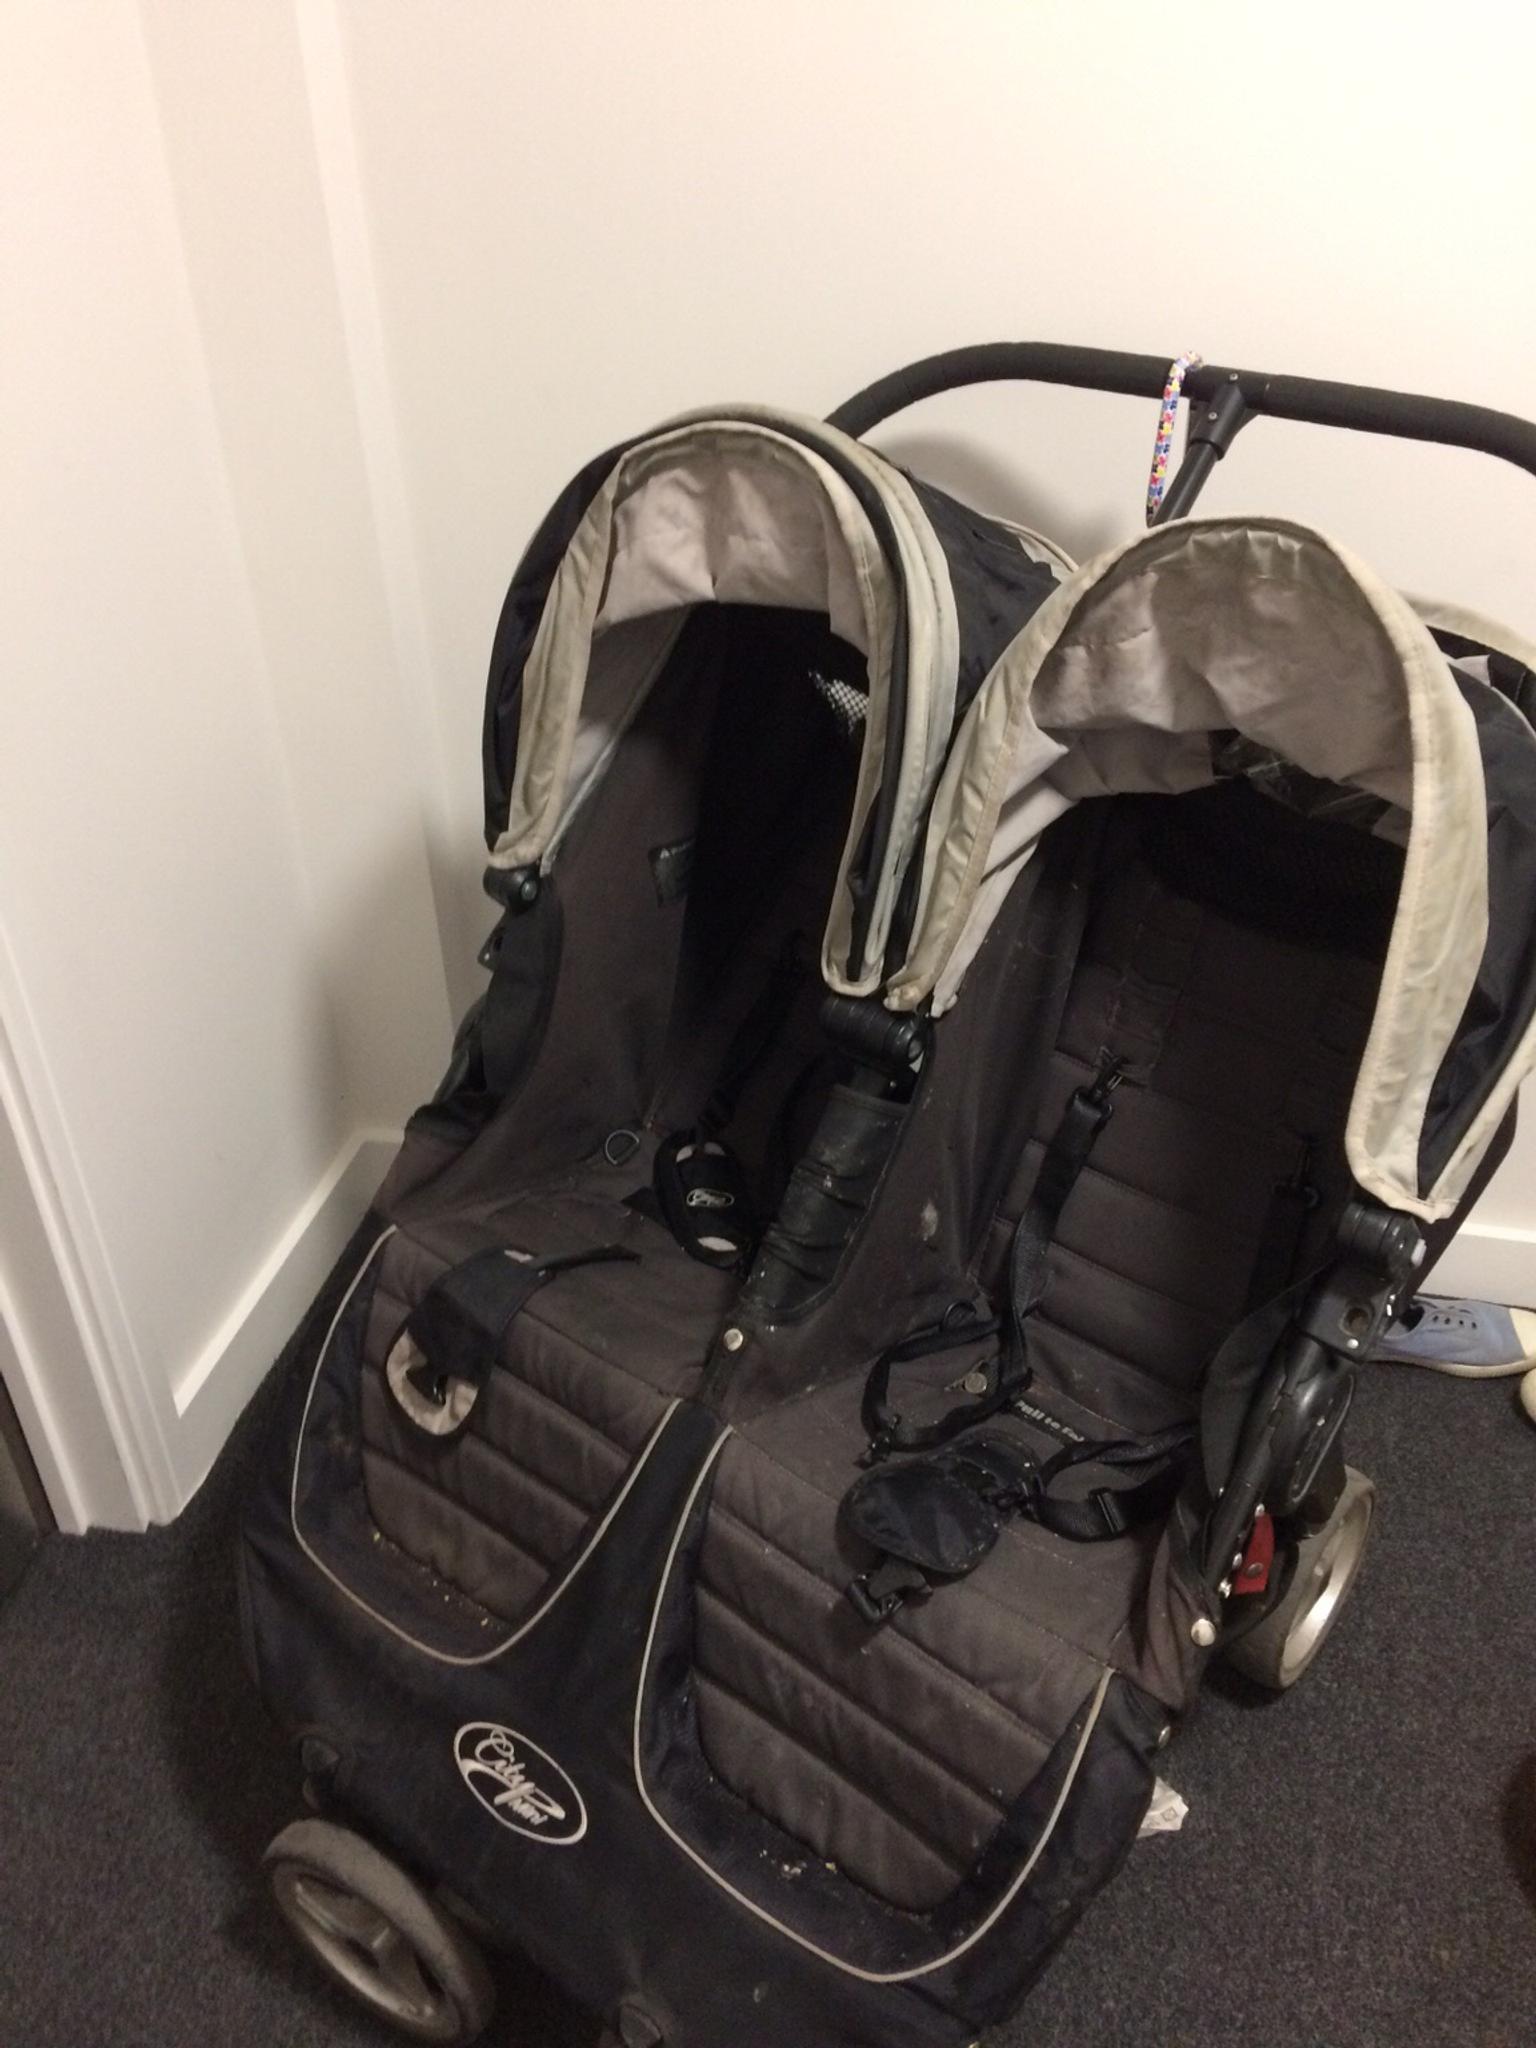 second hand double pushchairs